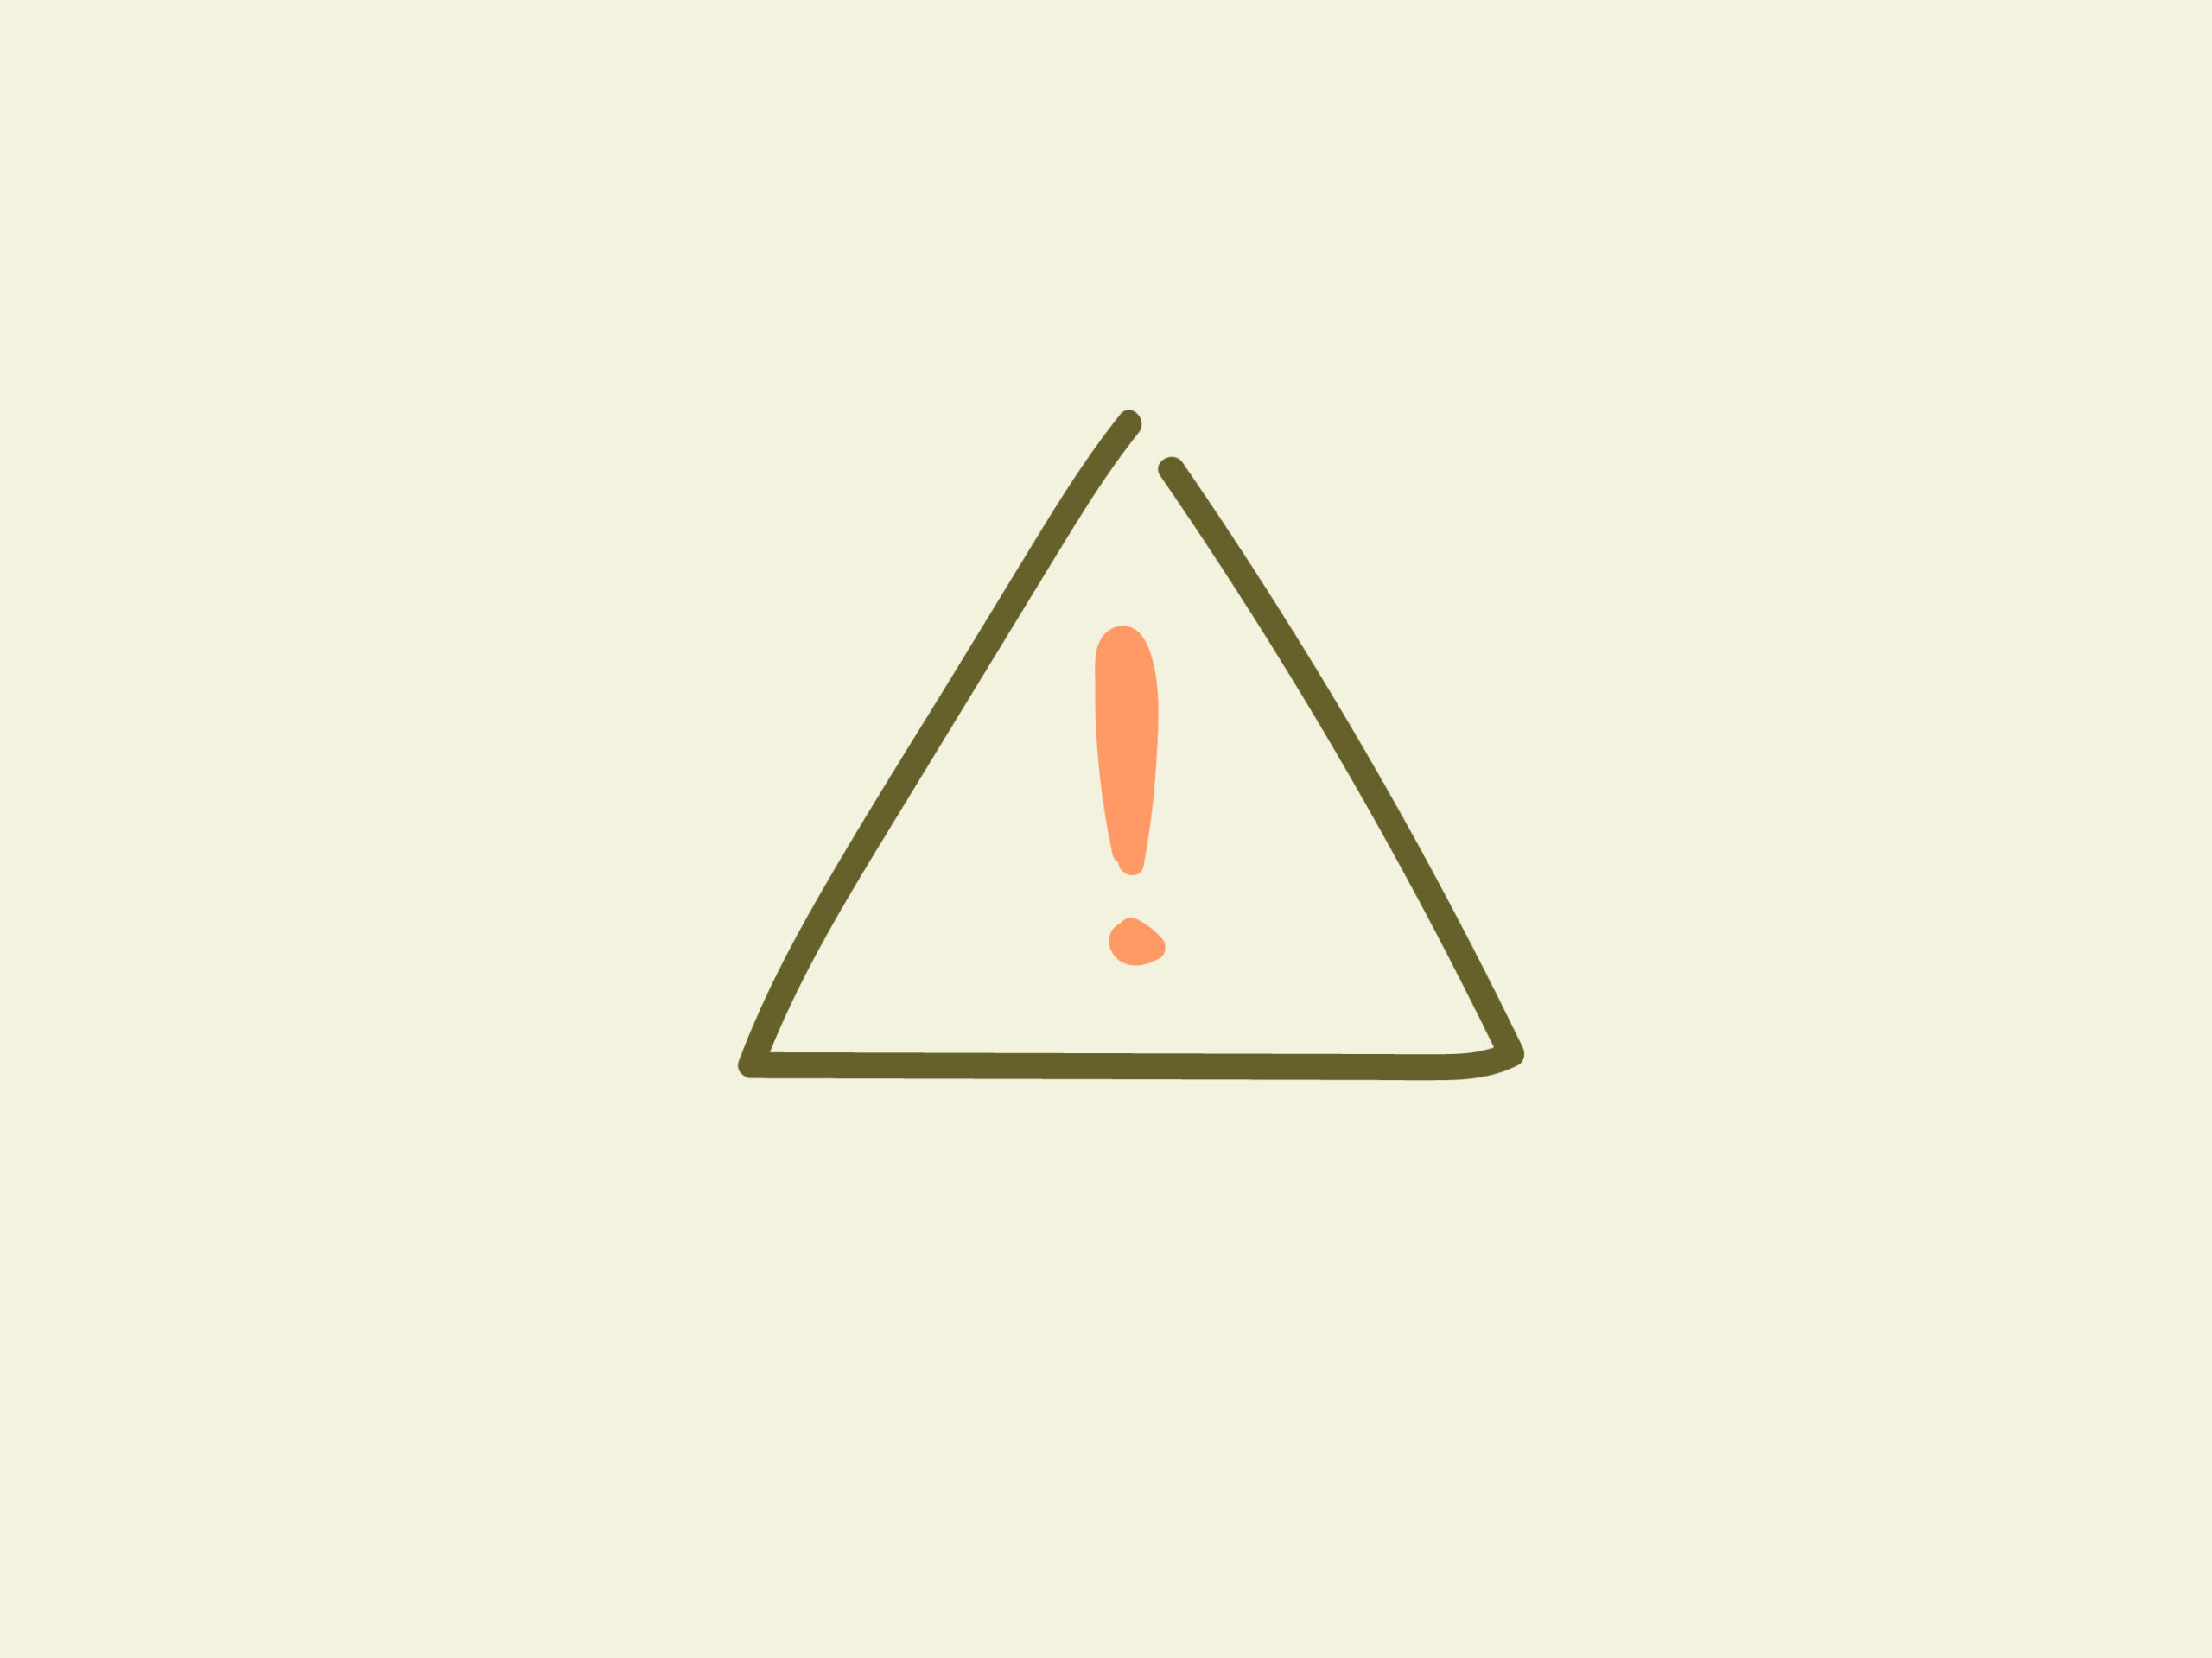 Triangle with exclamation point illustration